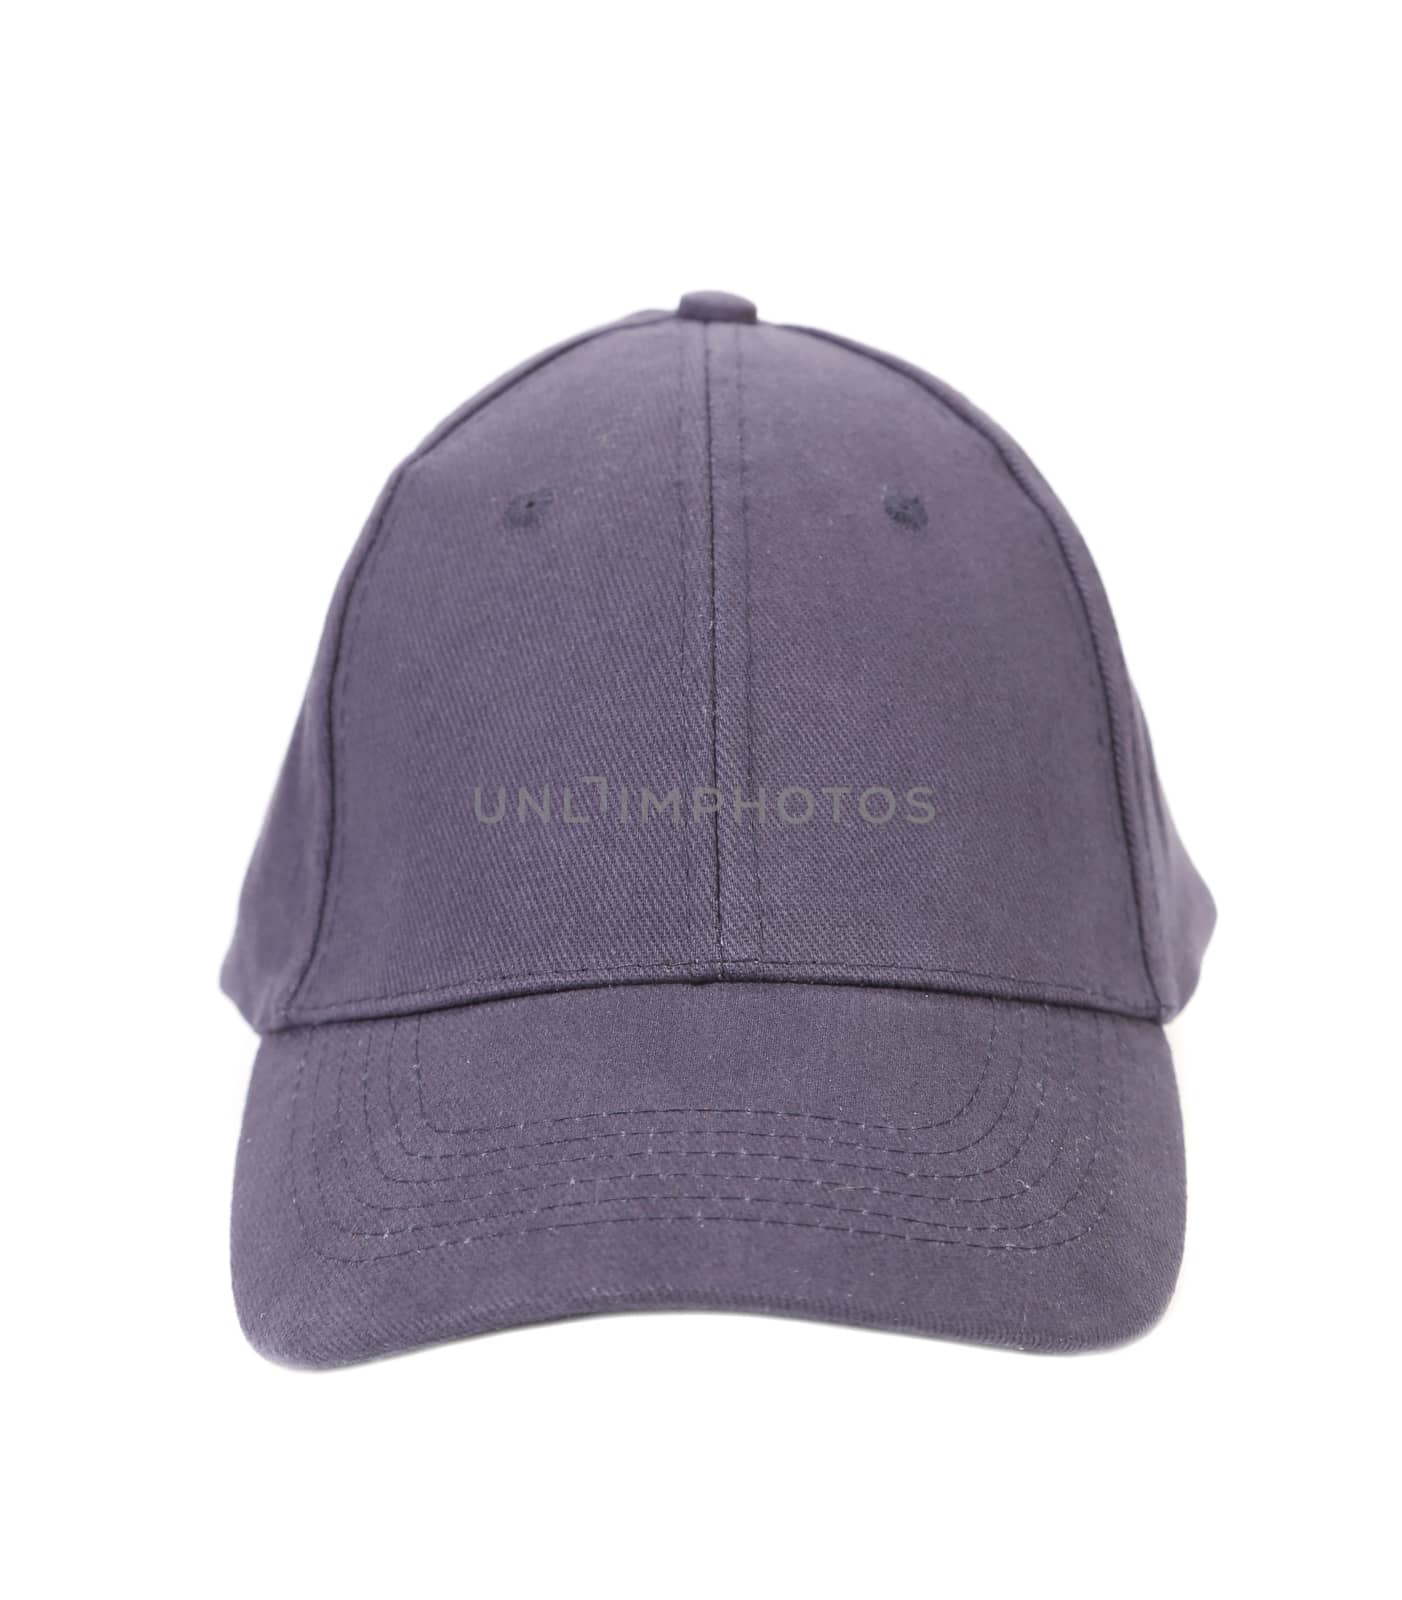 Close up of gray cap. Isolated on a white background.